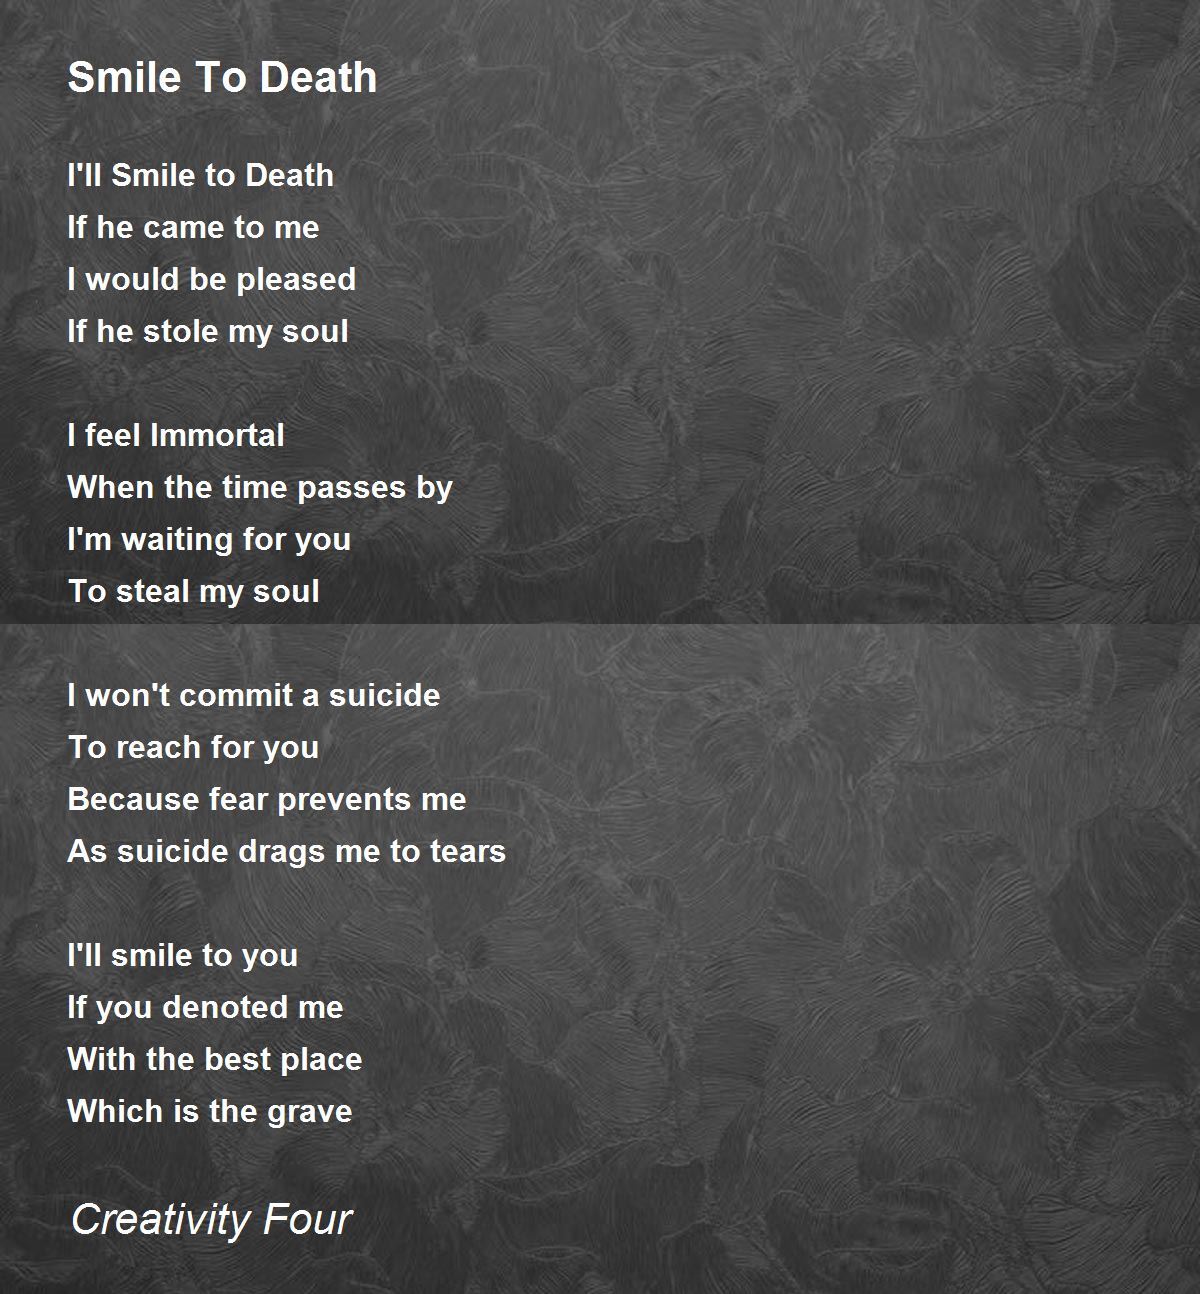 Smile To Death - Smile To Death Poem by Creativity Four